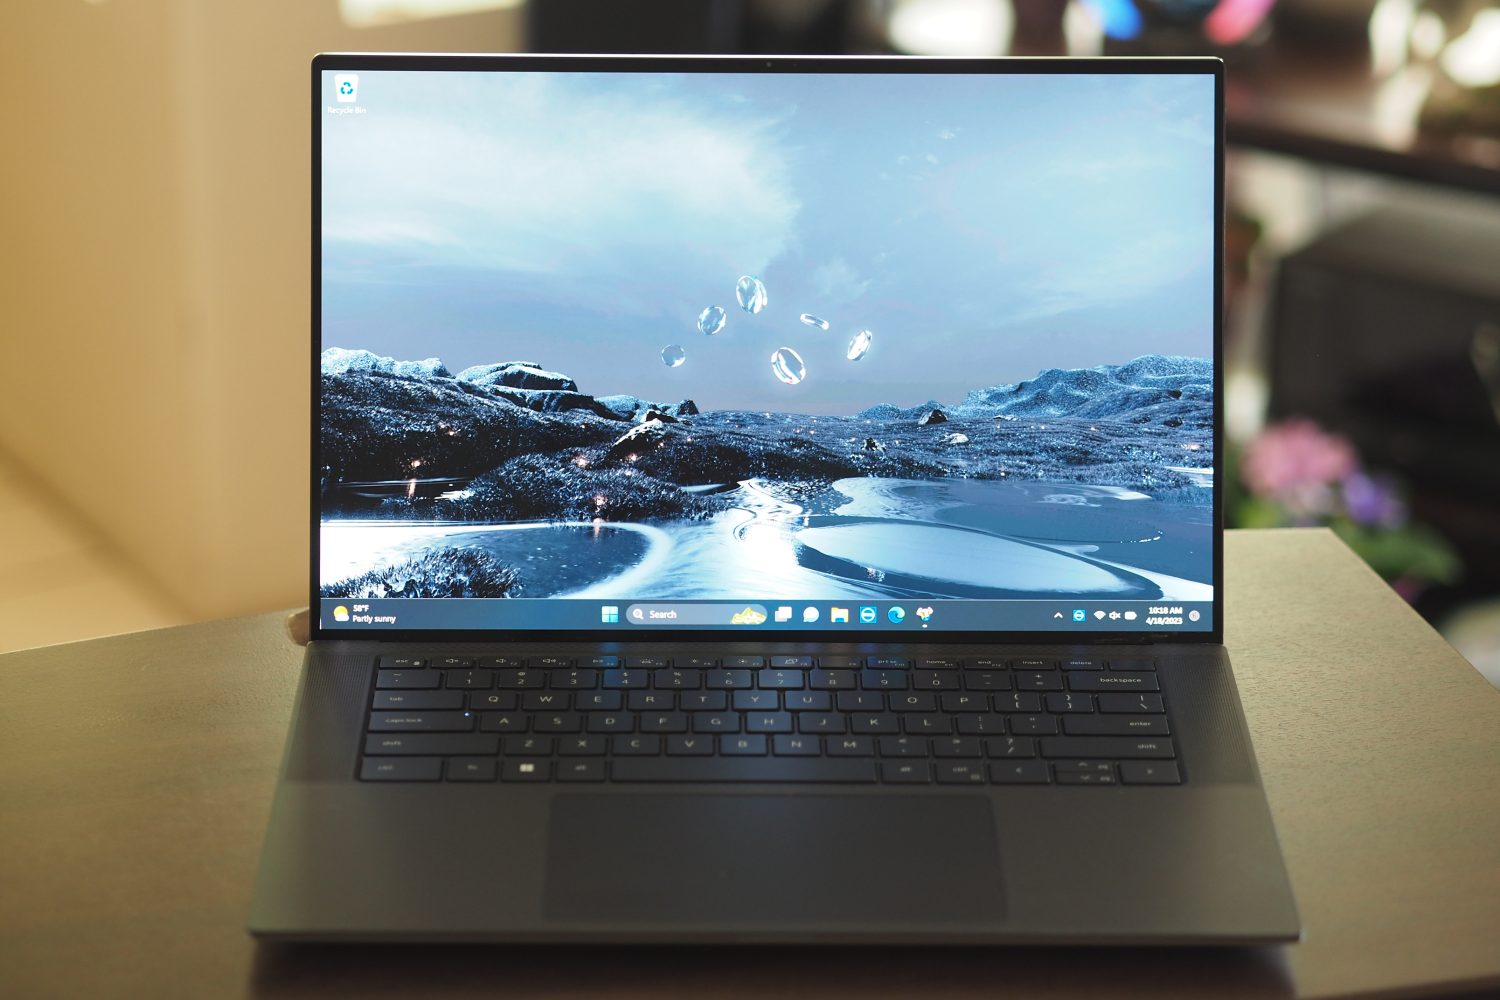 Dell XPS 15 Review: A Luxury Windows Laptop